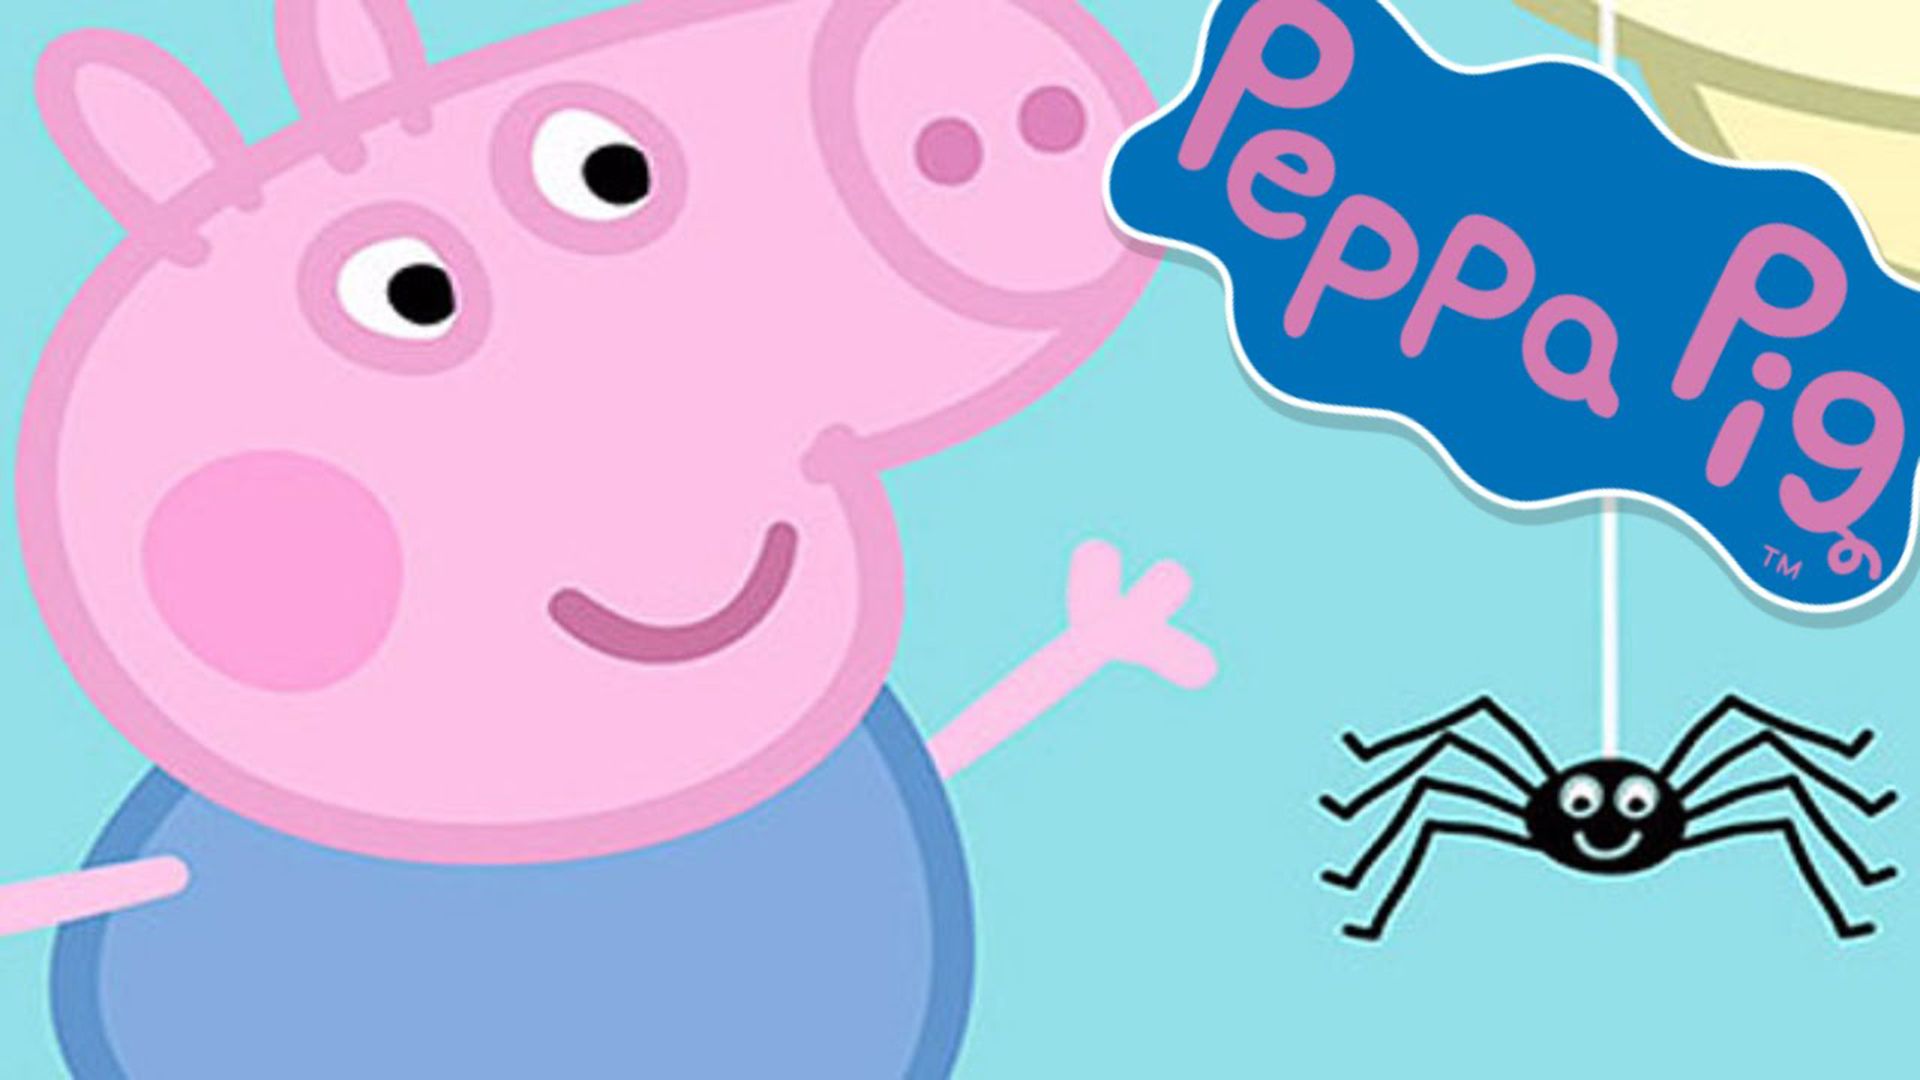 Peppa Pig House Wallpaper Discover more Backgrounds, Cartoon, daddy pig,  george pig, horror story wallpapers. htt…